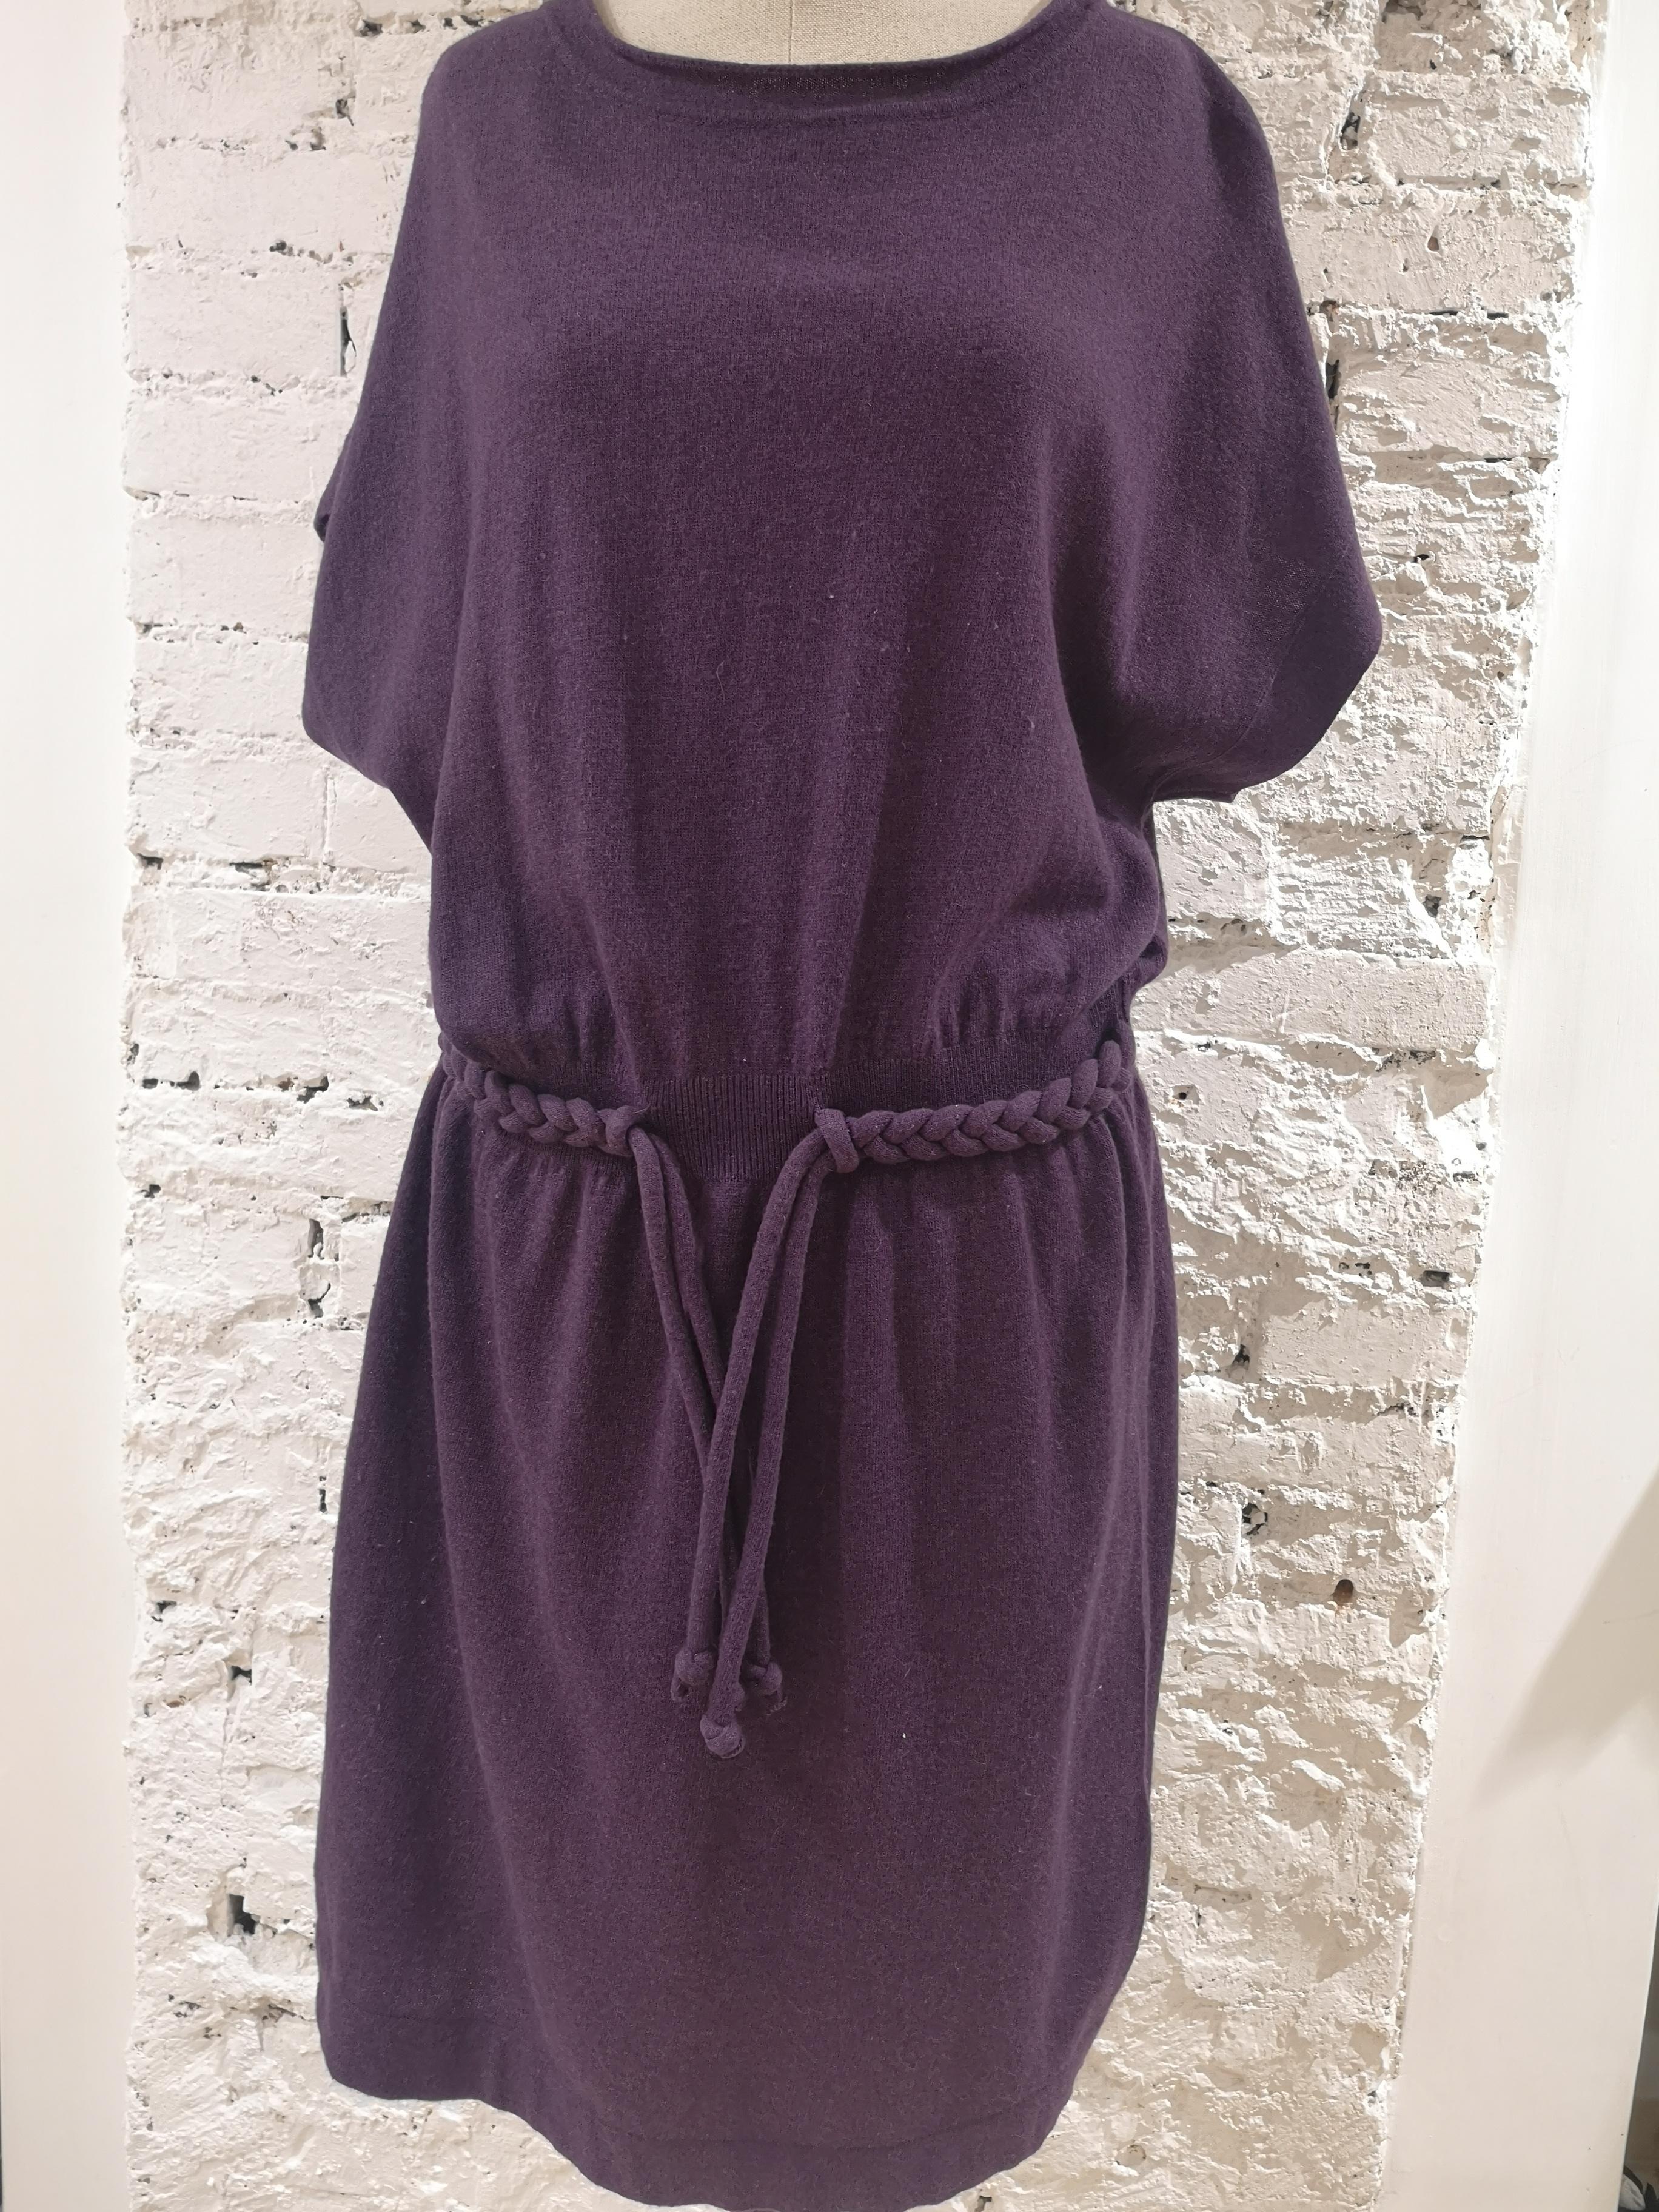 Moschino wool purple dress
totally made in italy in size 44
total lenght 107 cm